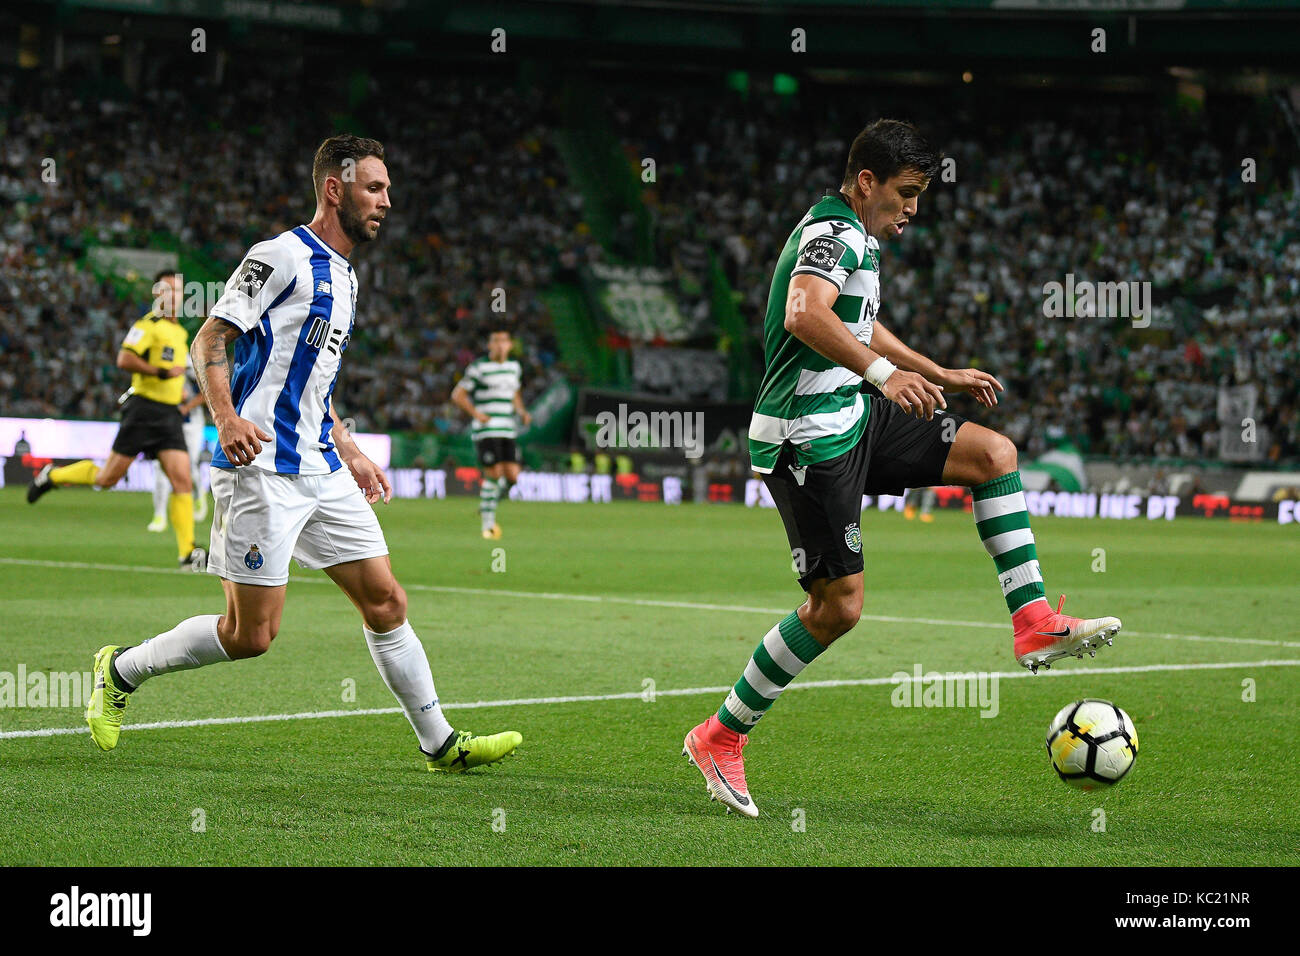 Portugal, Lisbon, 01.10.2017 - PORTUGUESE LEAGUE: SPORTING CP x FC PORTO - Miguel Layun from FC Porto and Marcos Acuna from Sporting CP in action during Portuguese League, Liga NOS, football match between Sporting CP and FC Porto in Alvalade Stadium on October 01, 2017 in Lisbon, Portugal. Credit: Bruno de Carvalho/Alamy Live News Stock Photo